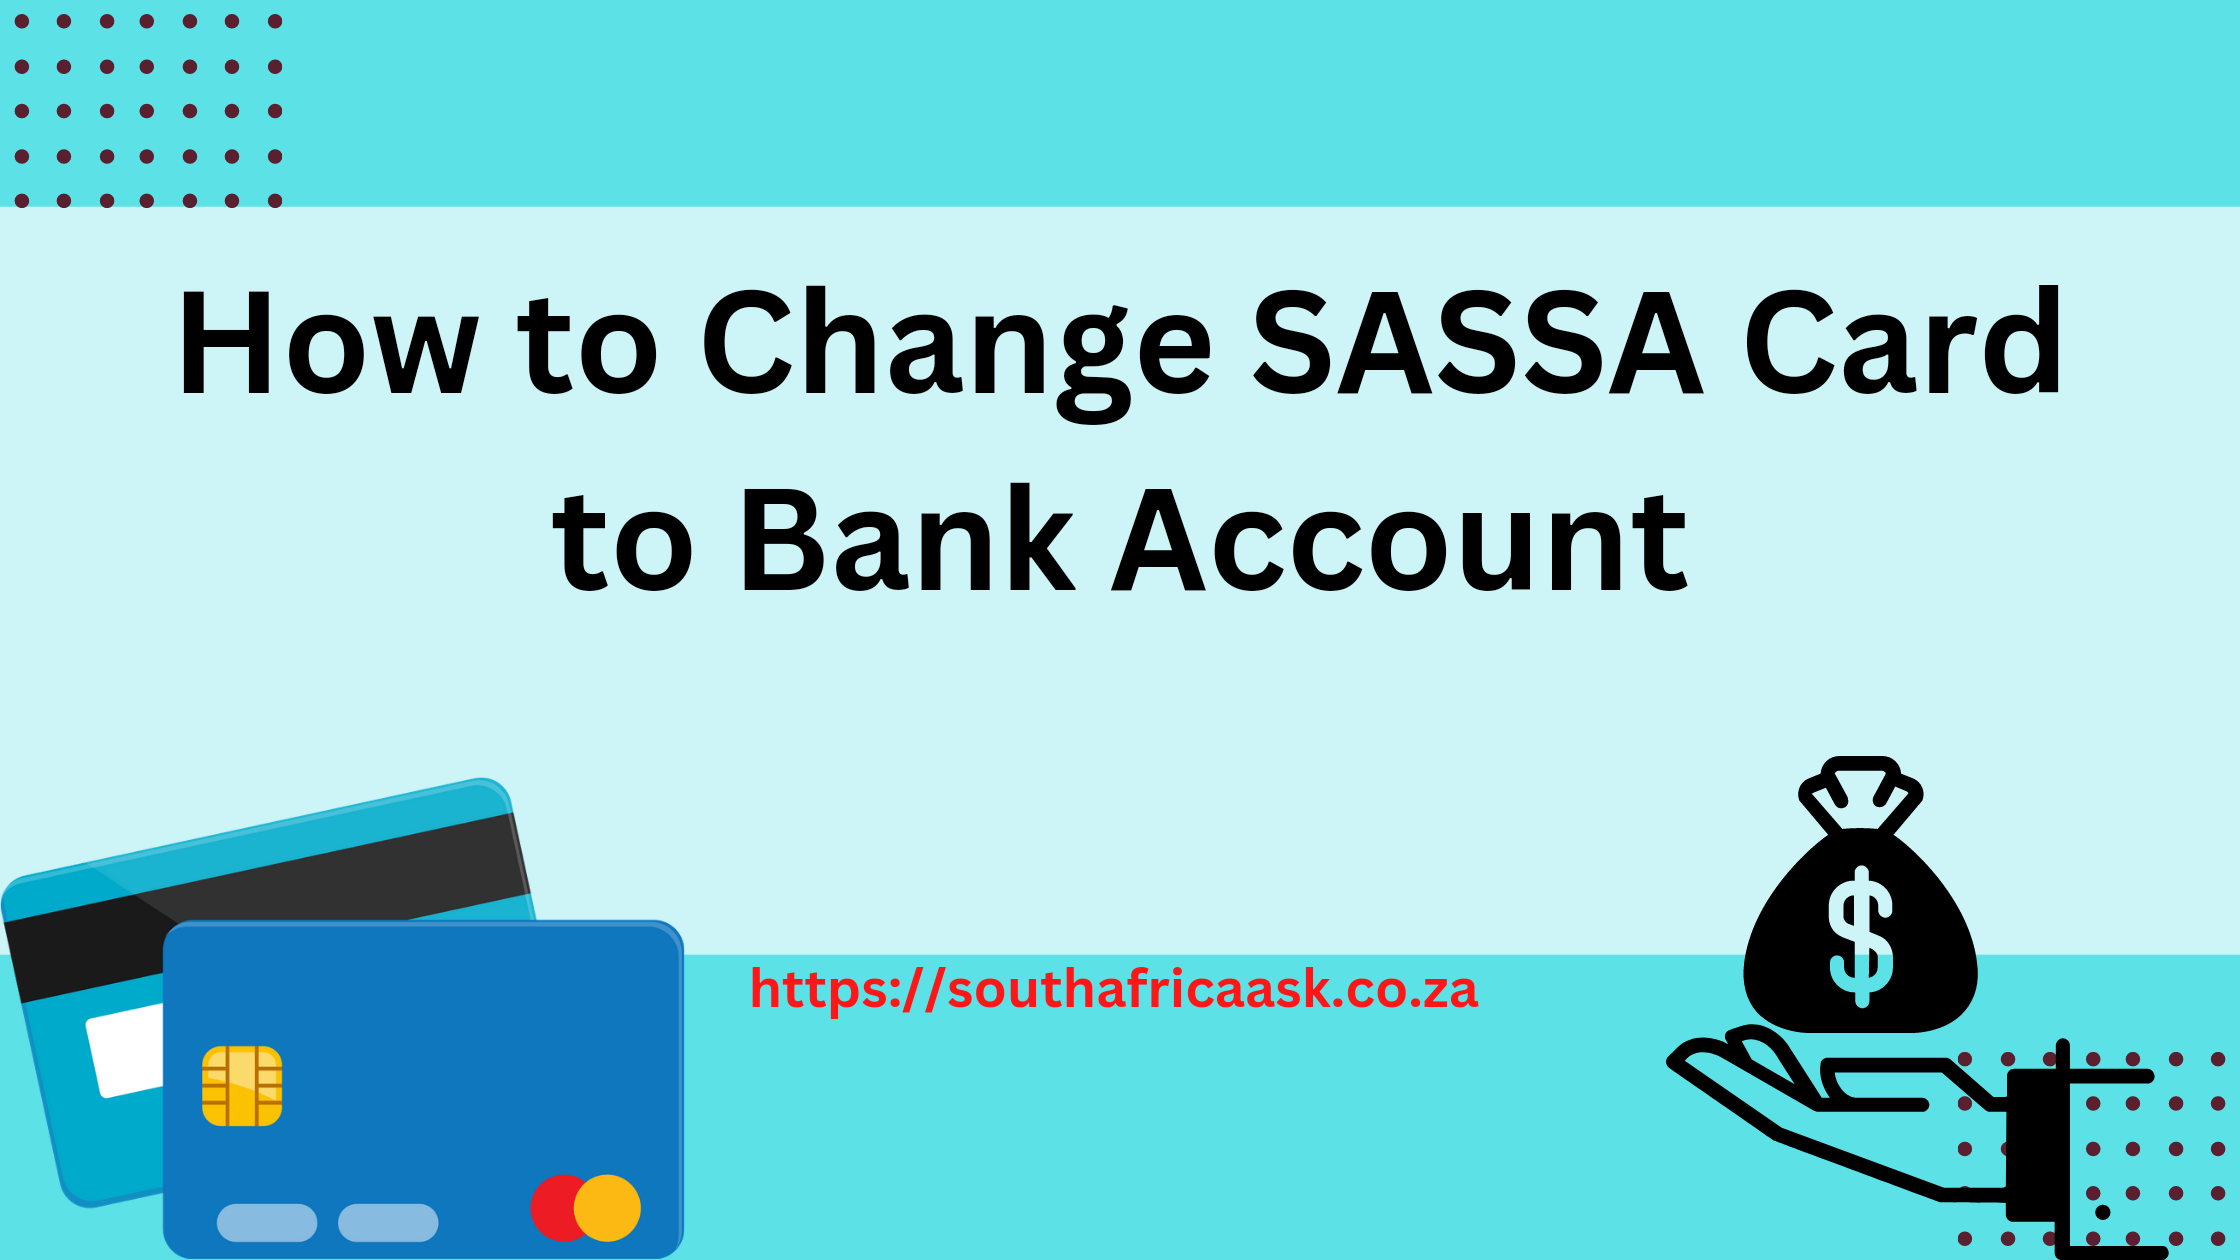 How to Change SASSA Card to Bank Account